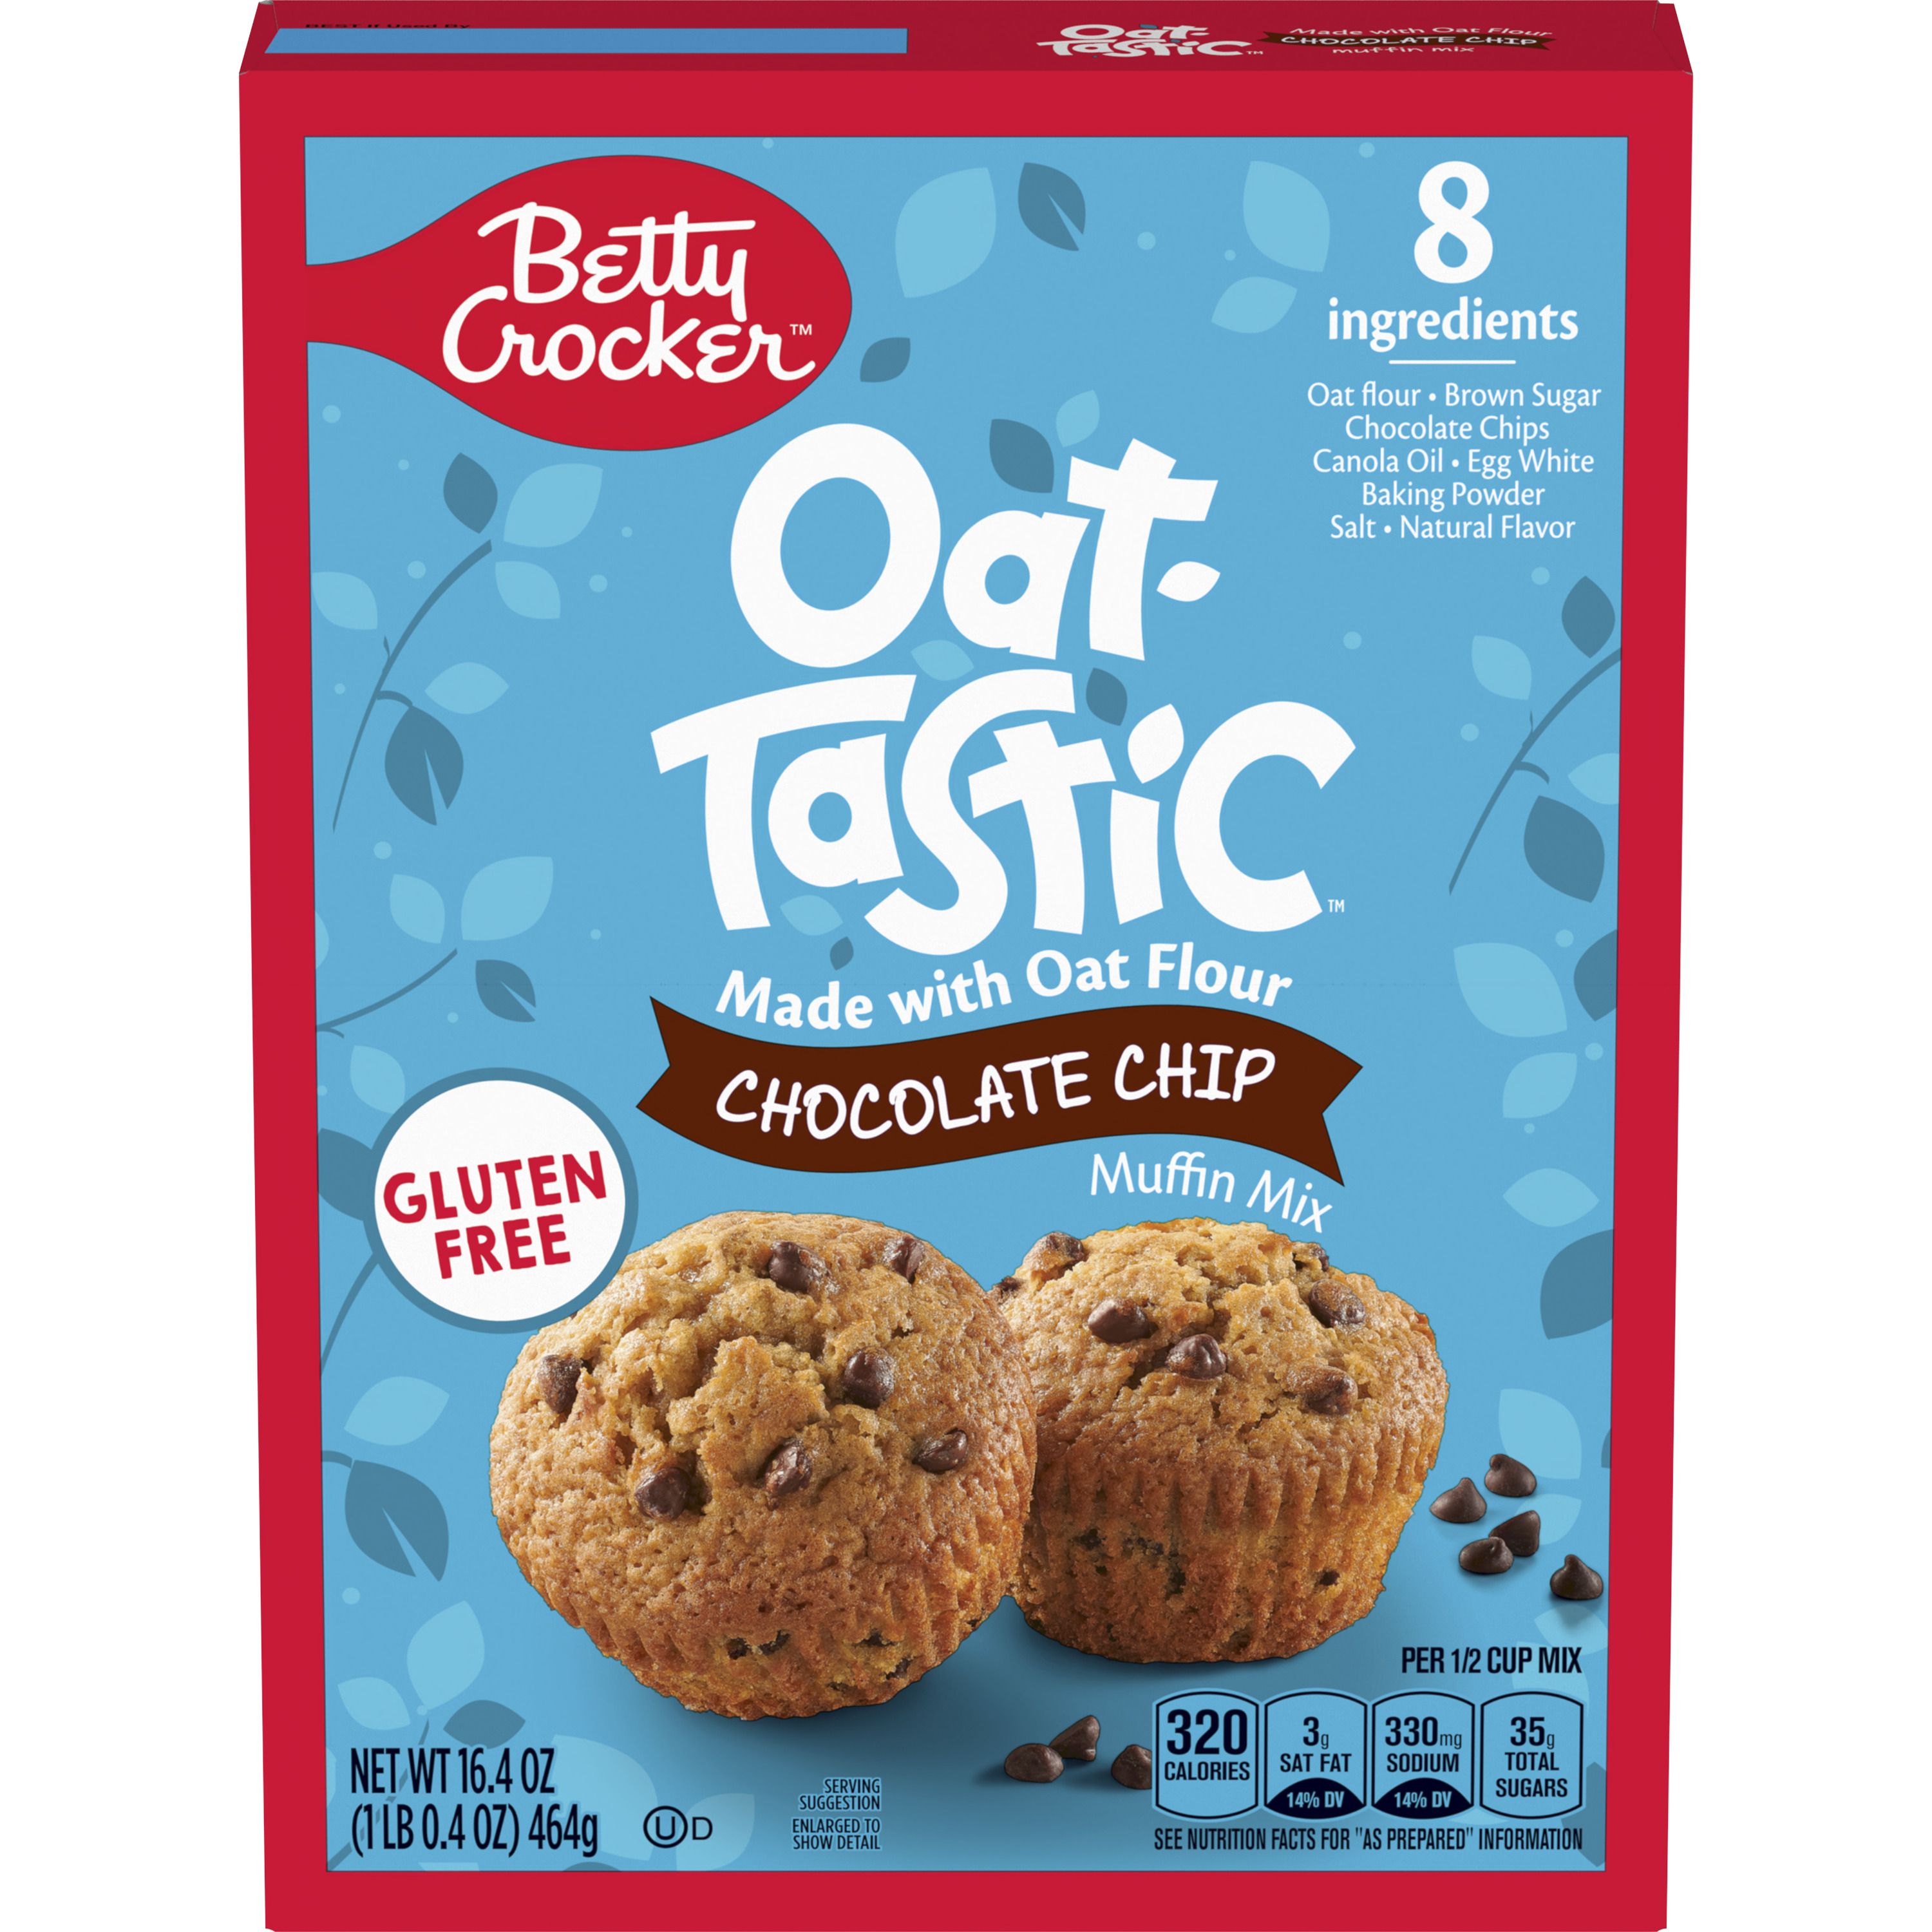 Betty Crocker Oat-Tastic Chocolate Chip Muffin Mix, 16.4 oz - Front